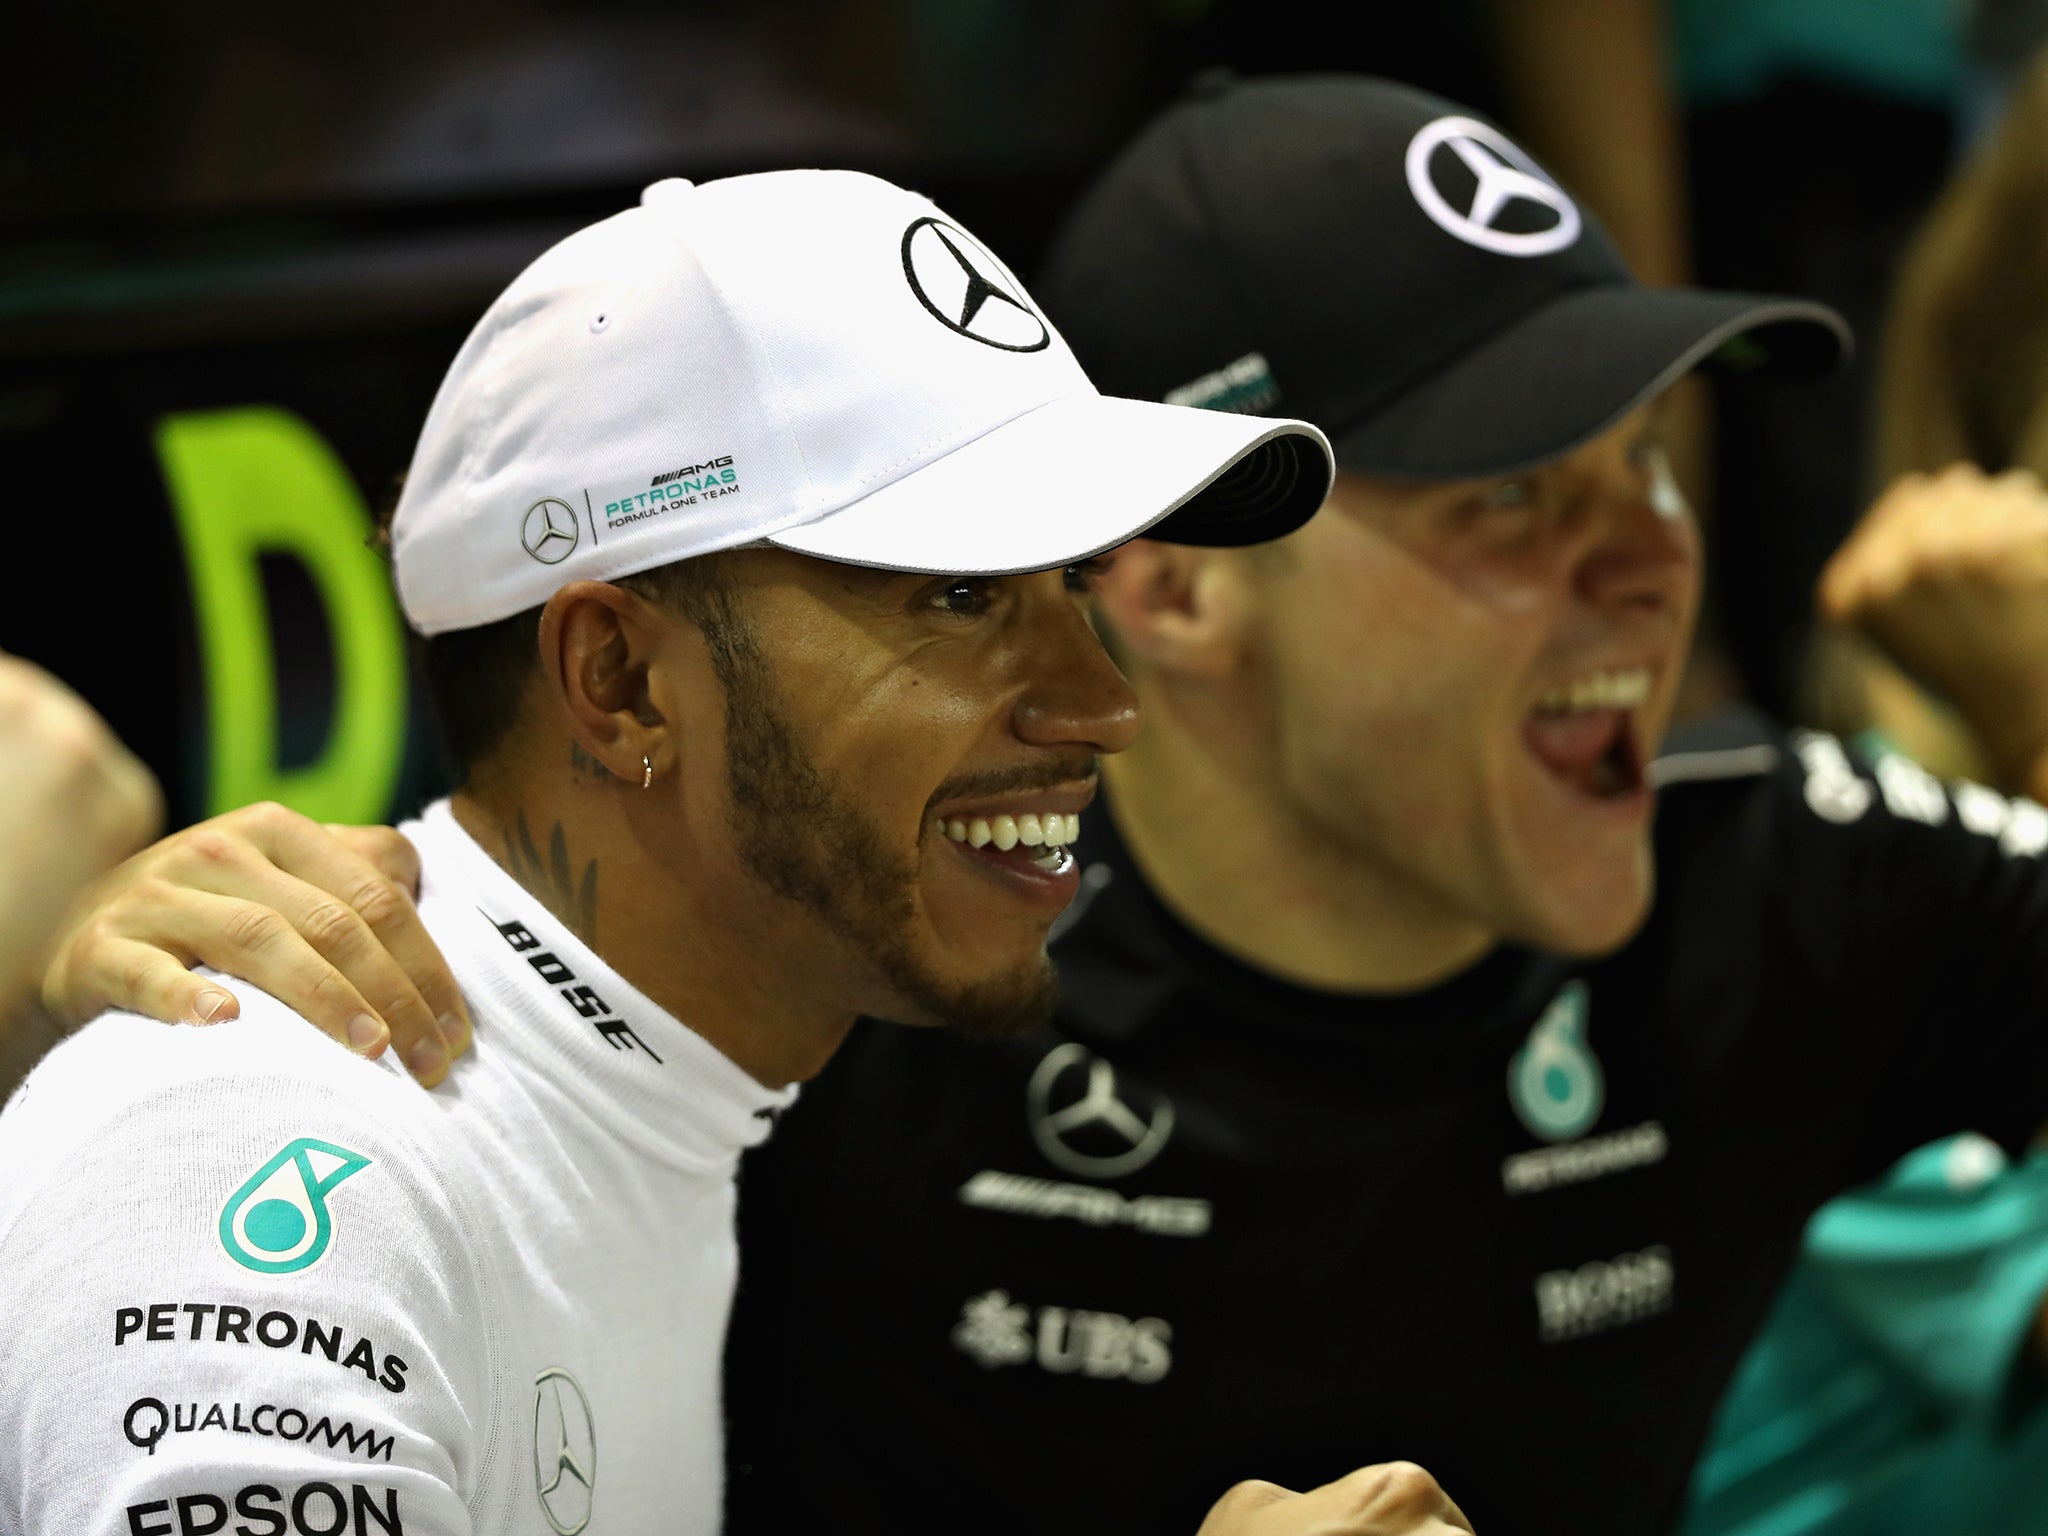 Hamilton now leads Vettel by 28 points in the world championship